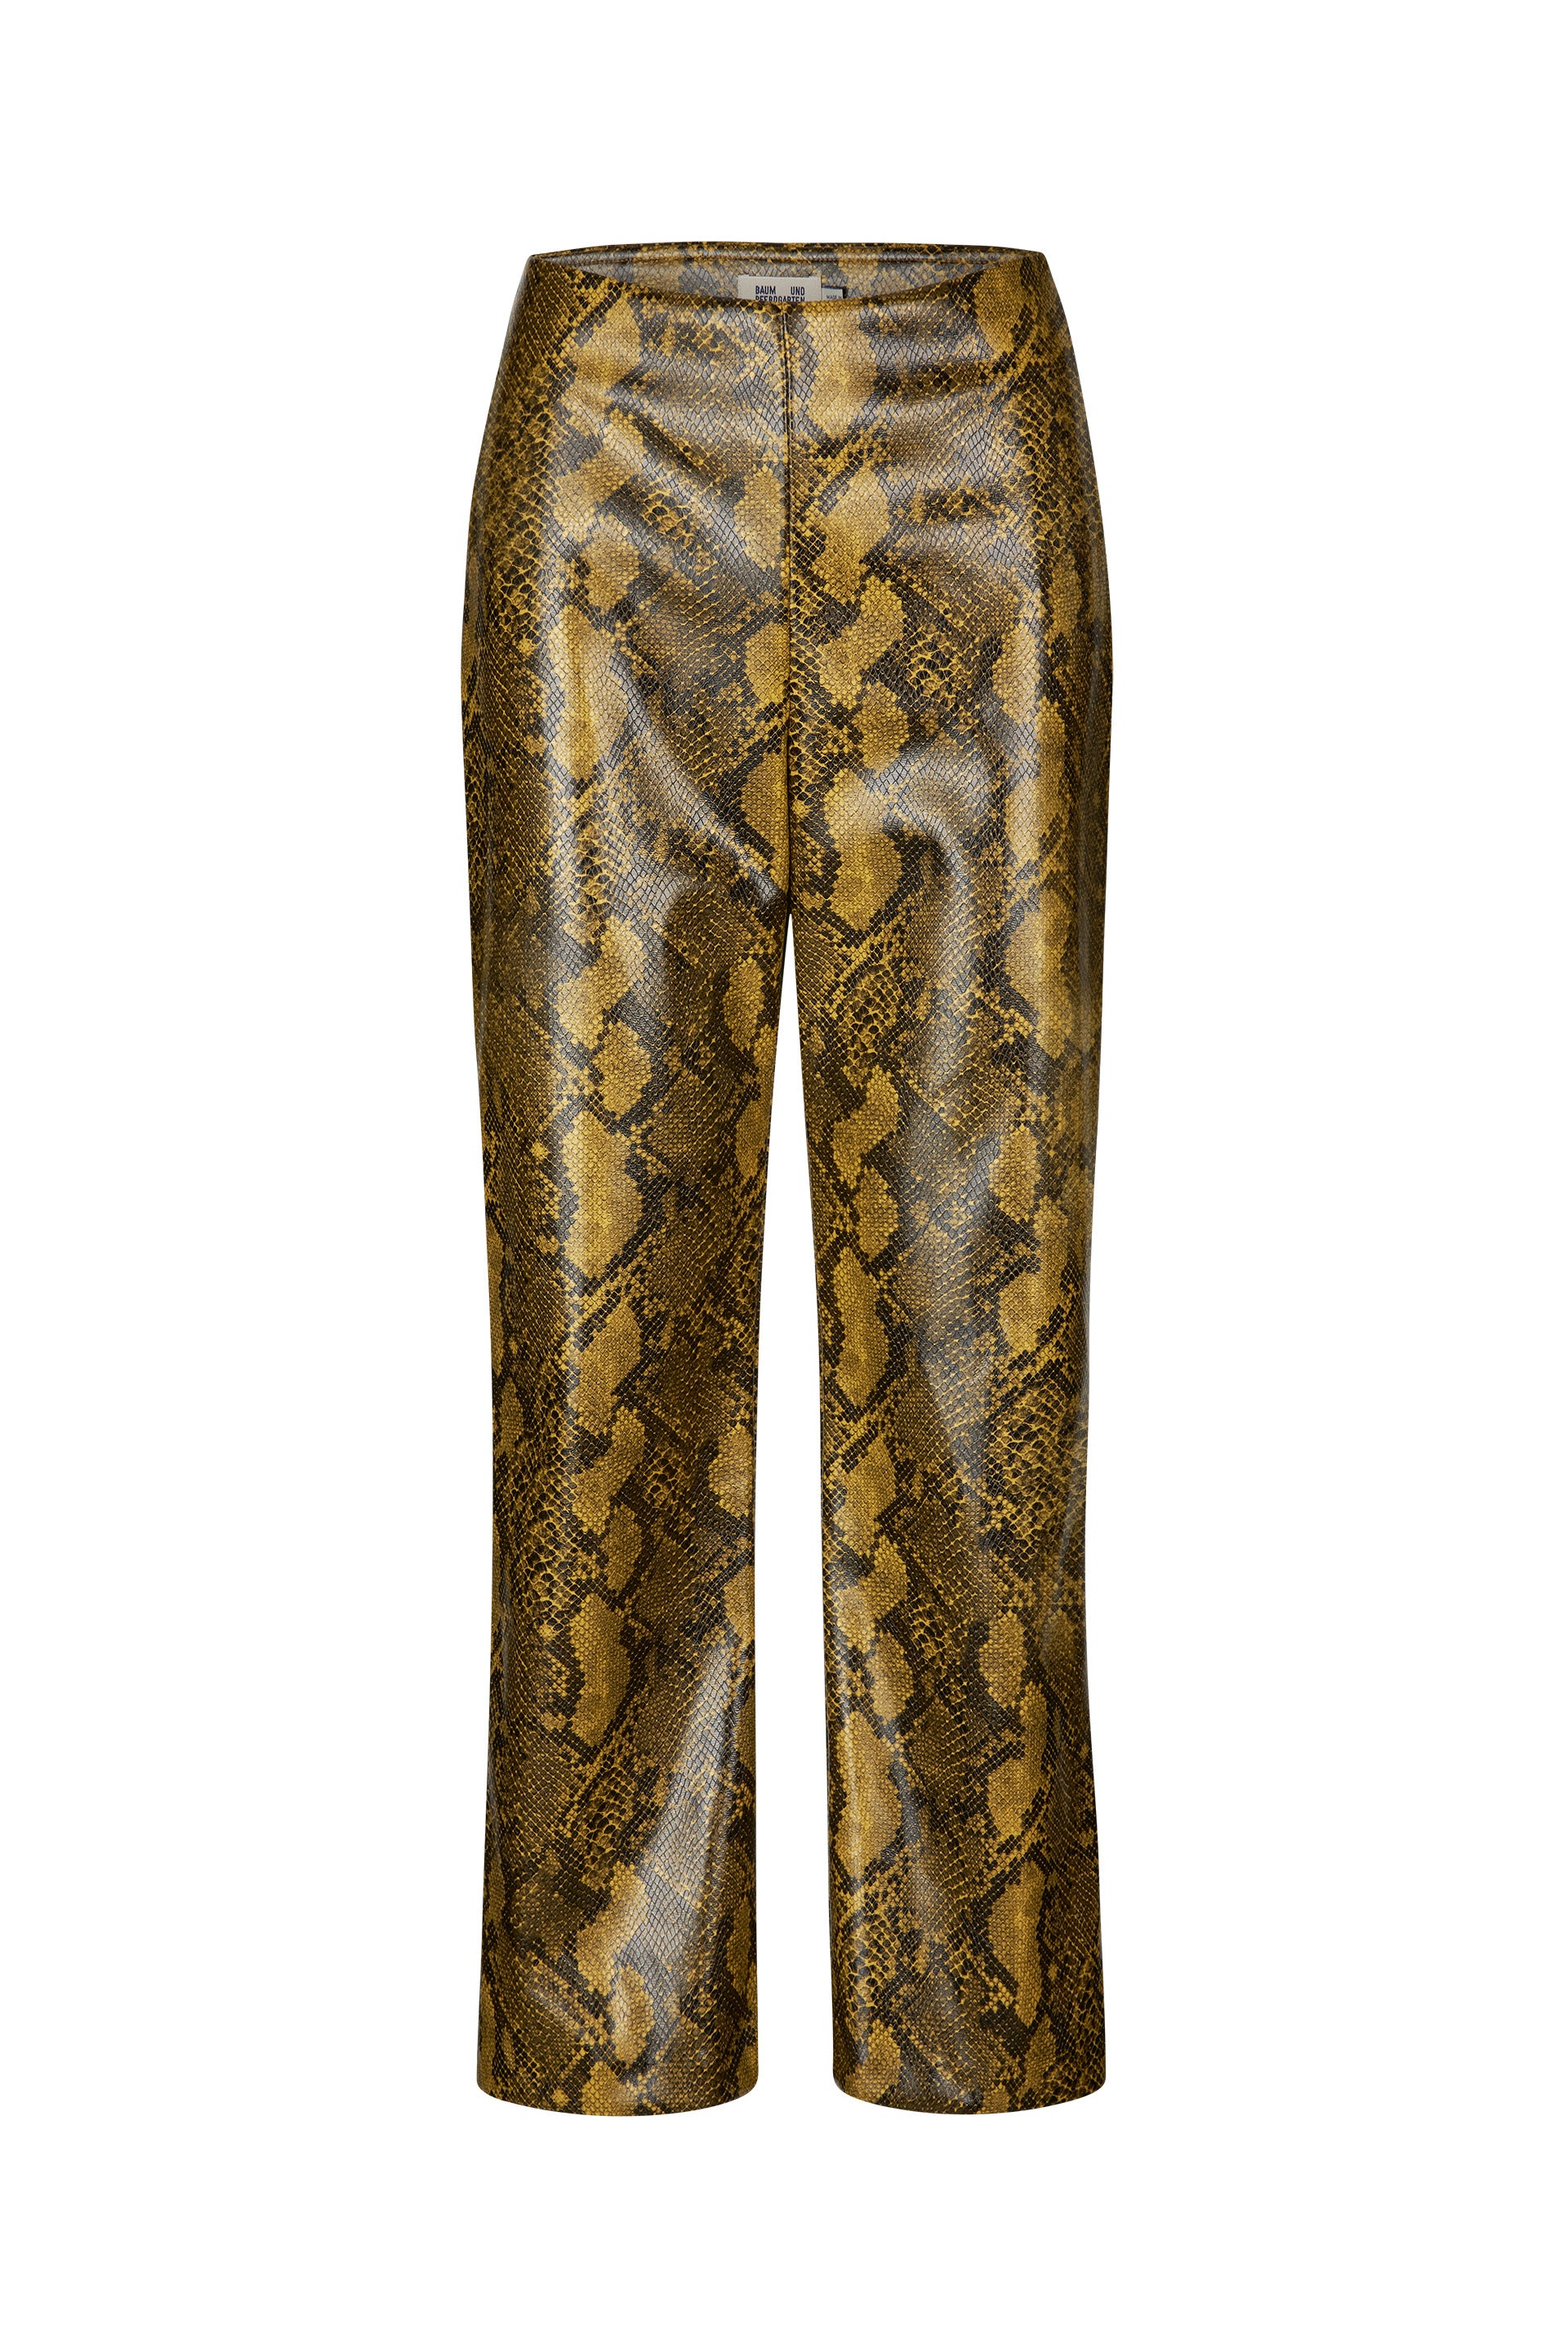 Norma black snake faux leather Pants